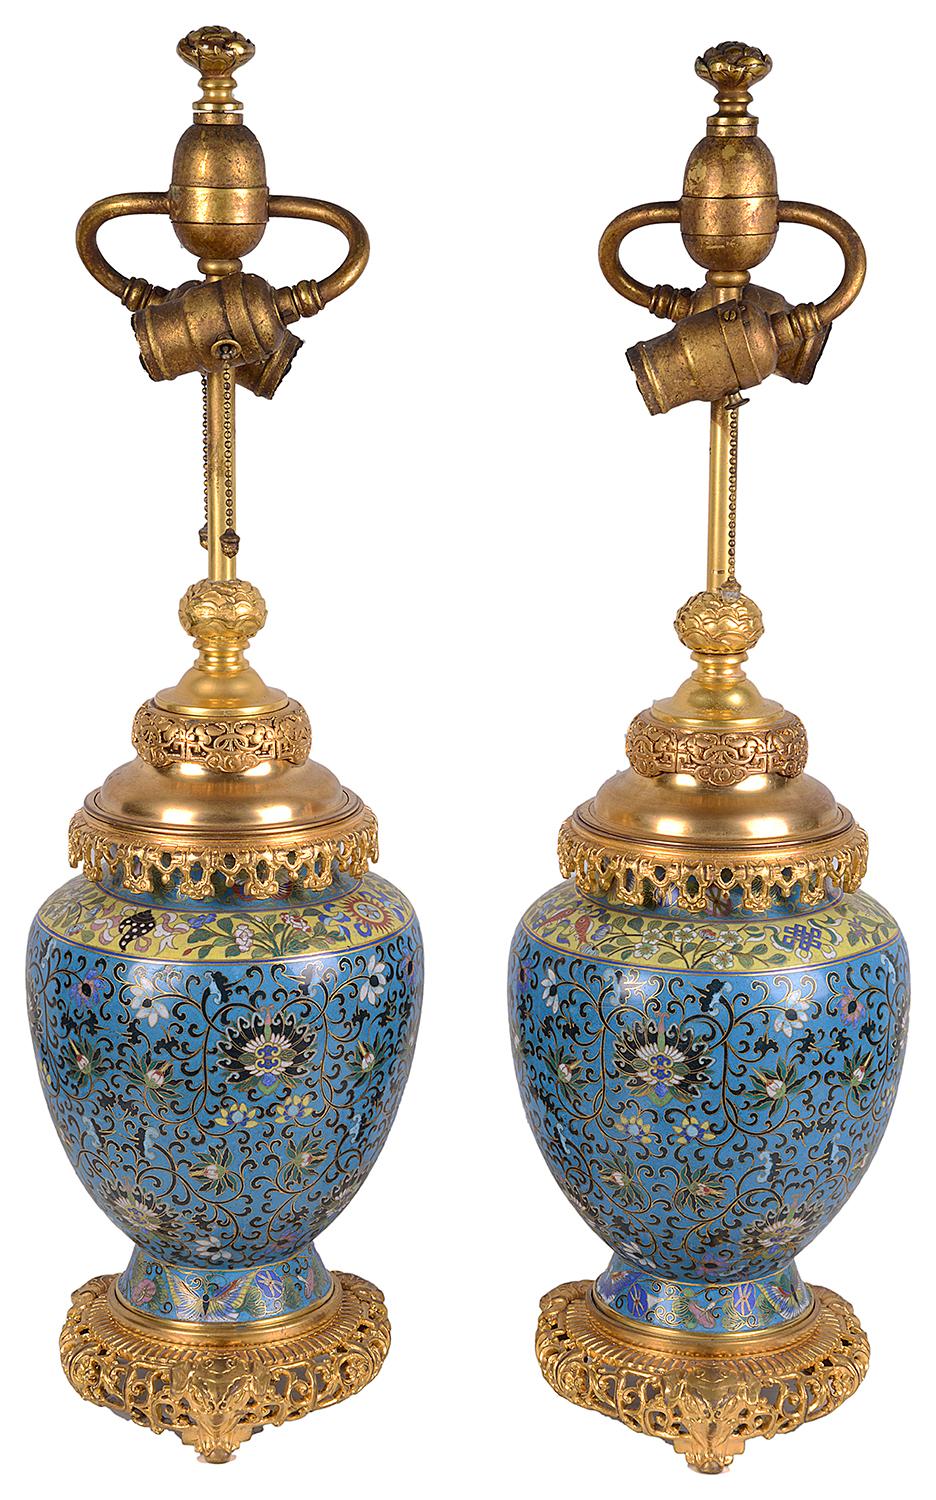 A very good quality pair of late 19th century Chinese cloisonné enamel and gilded ormolu vases / lamps. Each with wonderful classical bold colours, scrolling motif and foliate decoration.